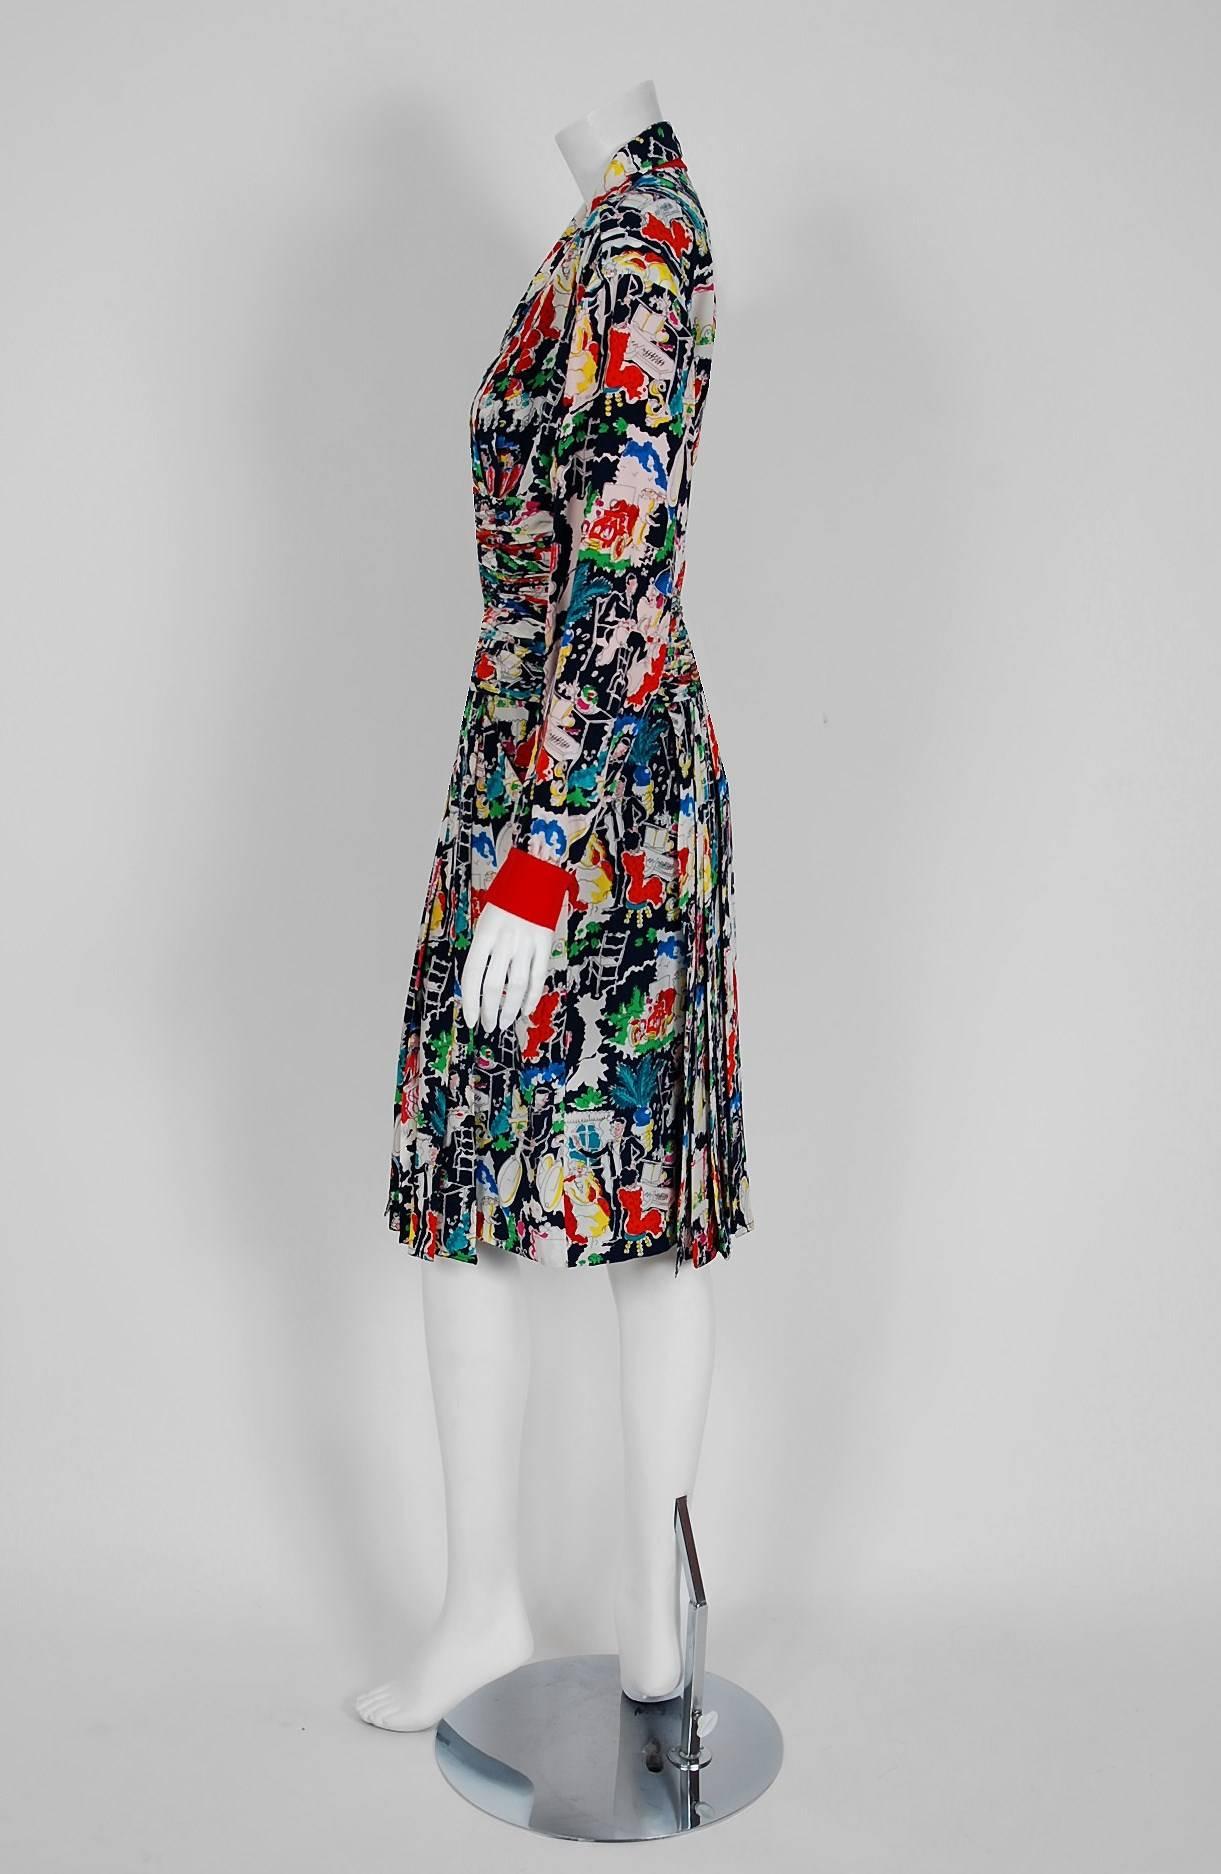 Chanel is known to be one of the most luxurious and decadent fashion houses in the world. This gorgeous Paris novelty print scenic silk dress is a perfect example of why this couture brand has stood the test of time. Not only is this little number